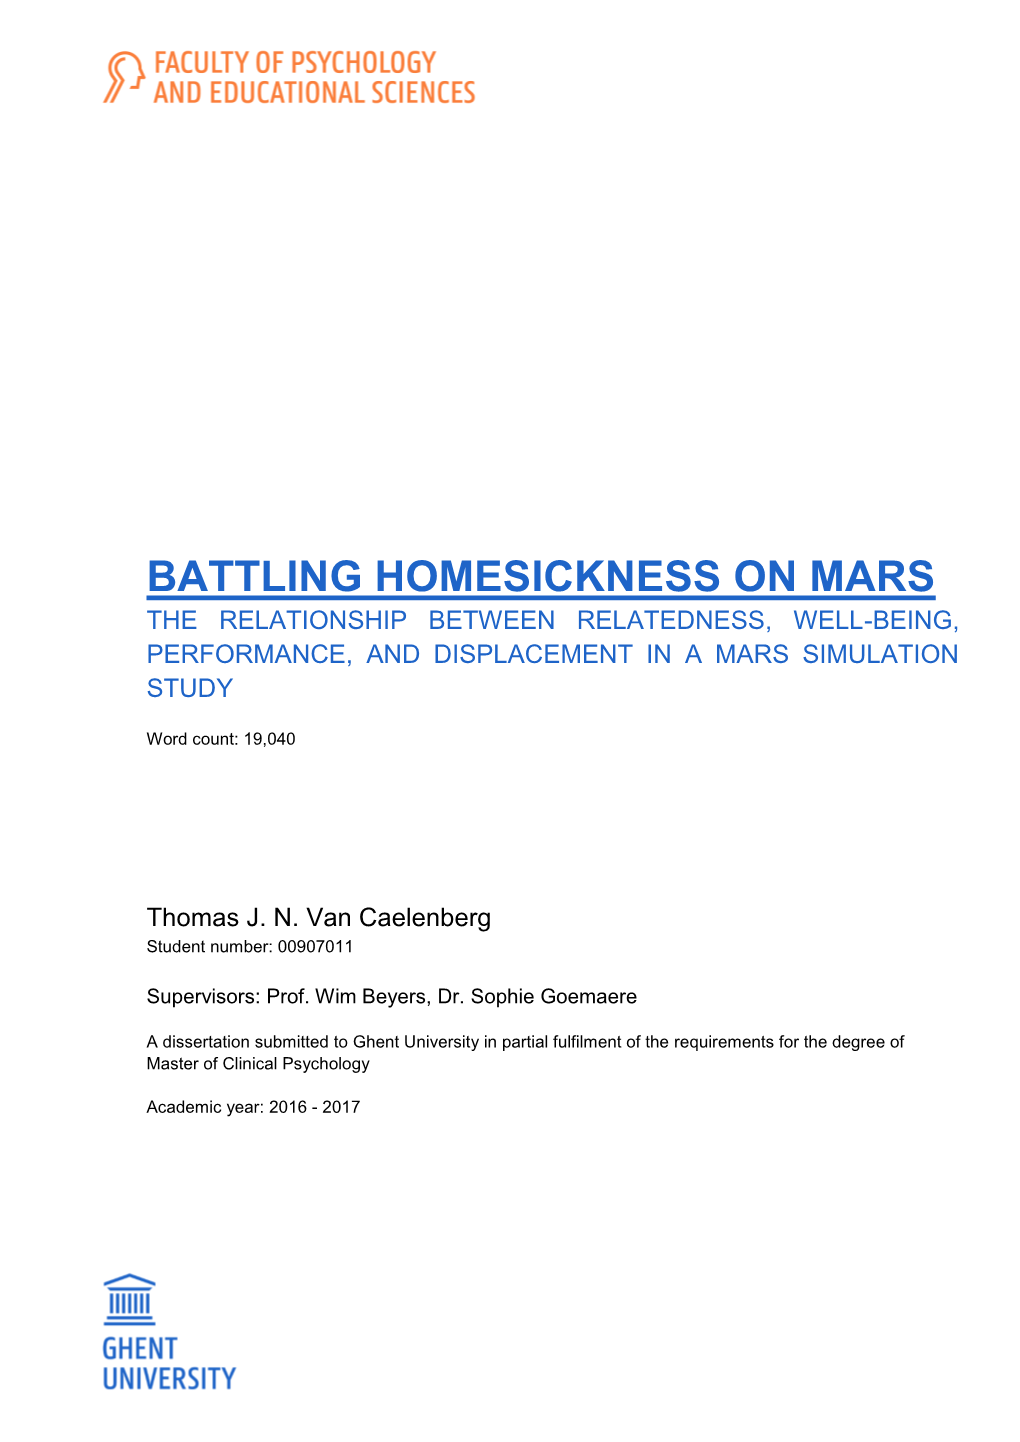 Battling Homesickness on Mars the Relationship Between Relatedness, Well-Being, Performance, and Displacement in a Mars Simulation Study